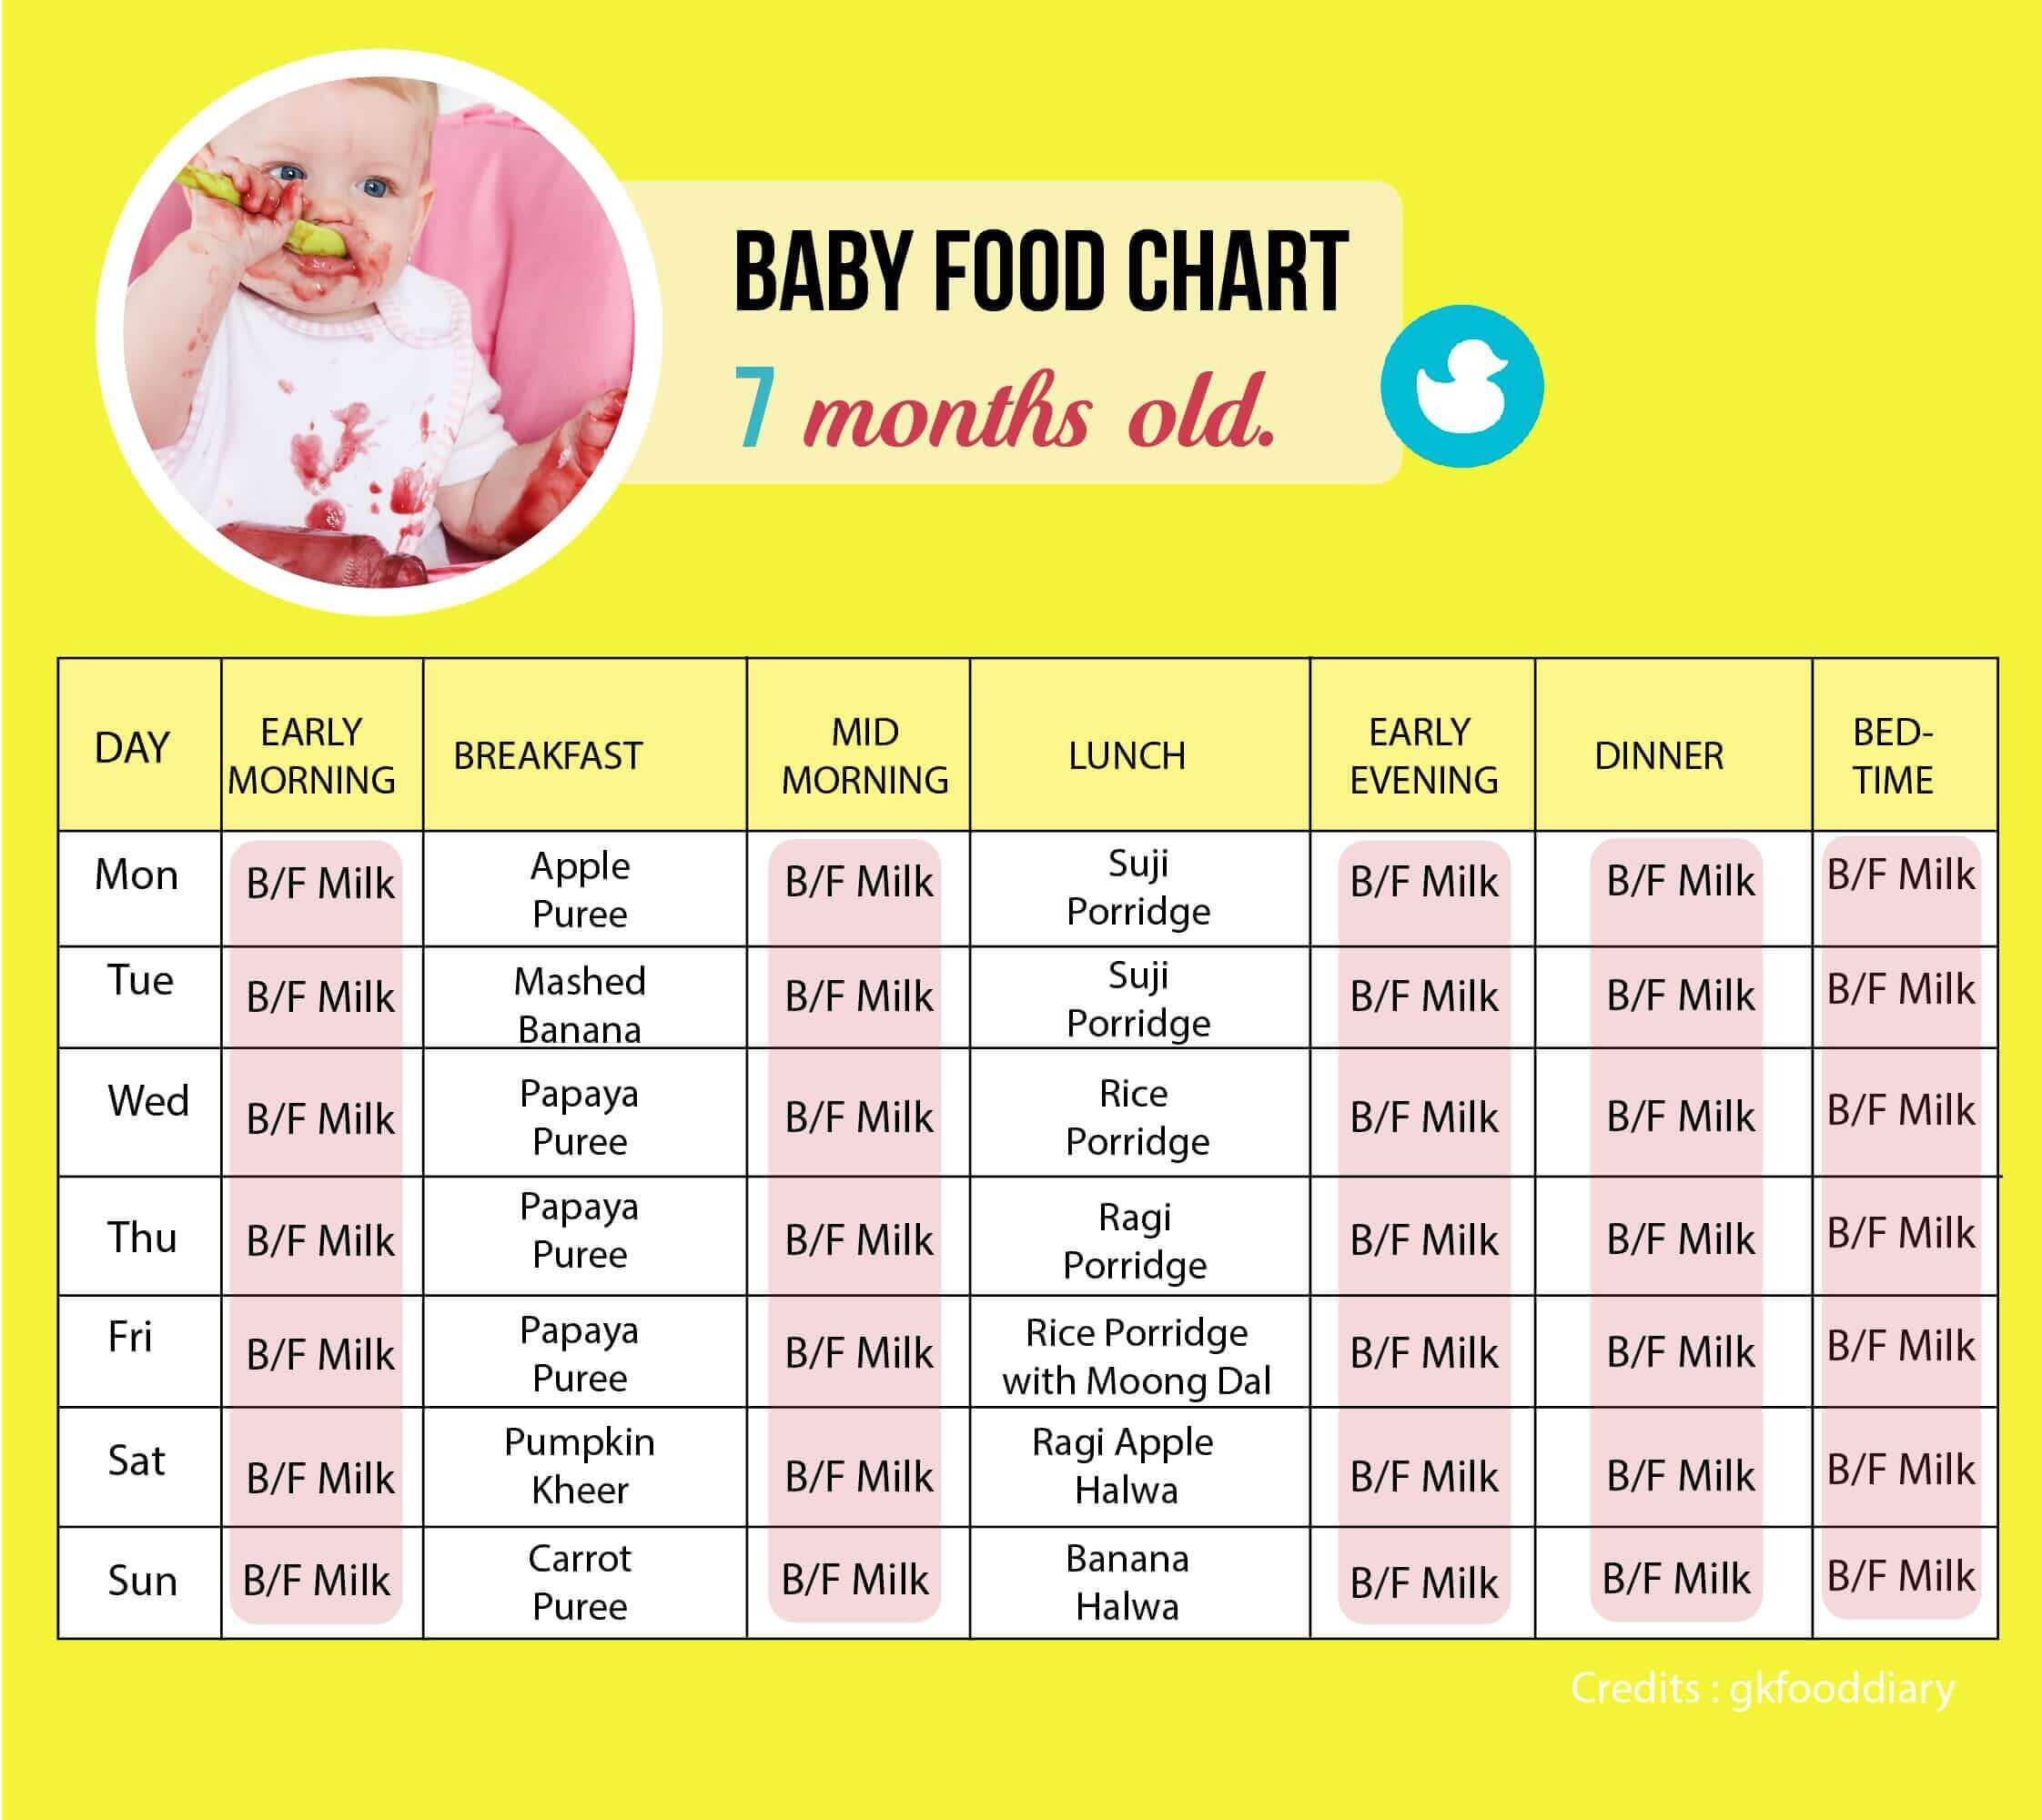 Recipes For 7 Month Old Baby
 Food Chart for a 7 month old baby Tinystep